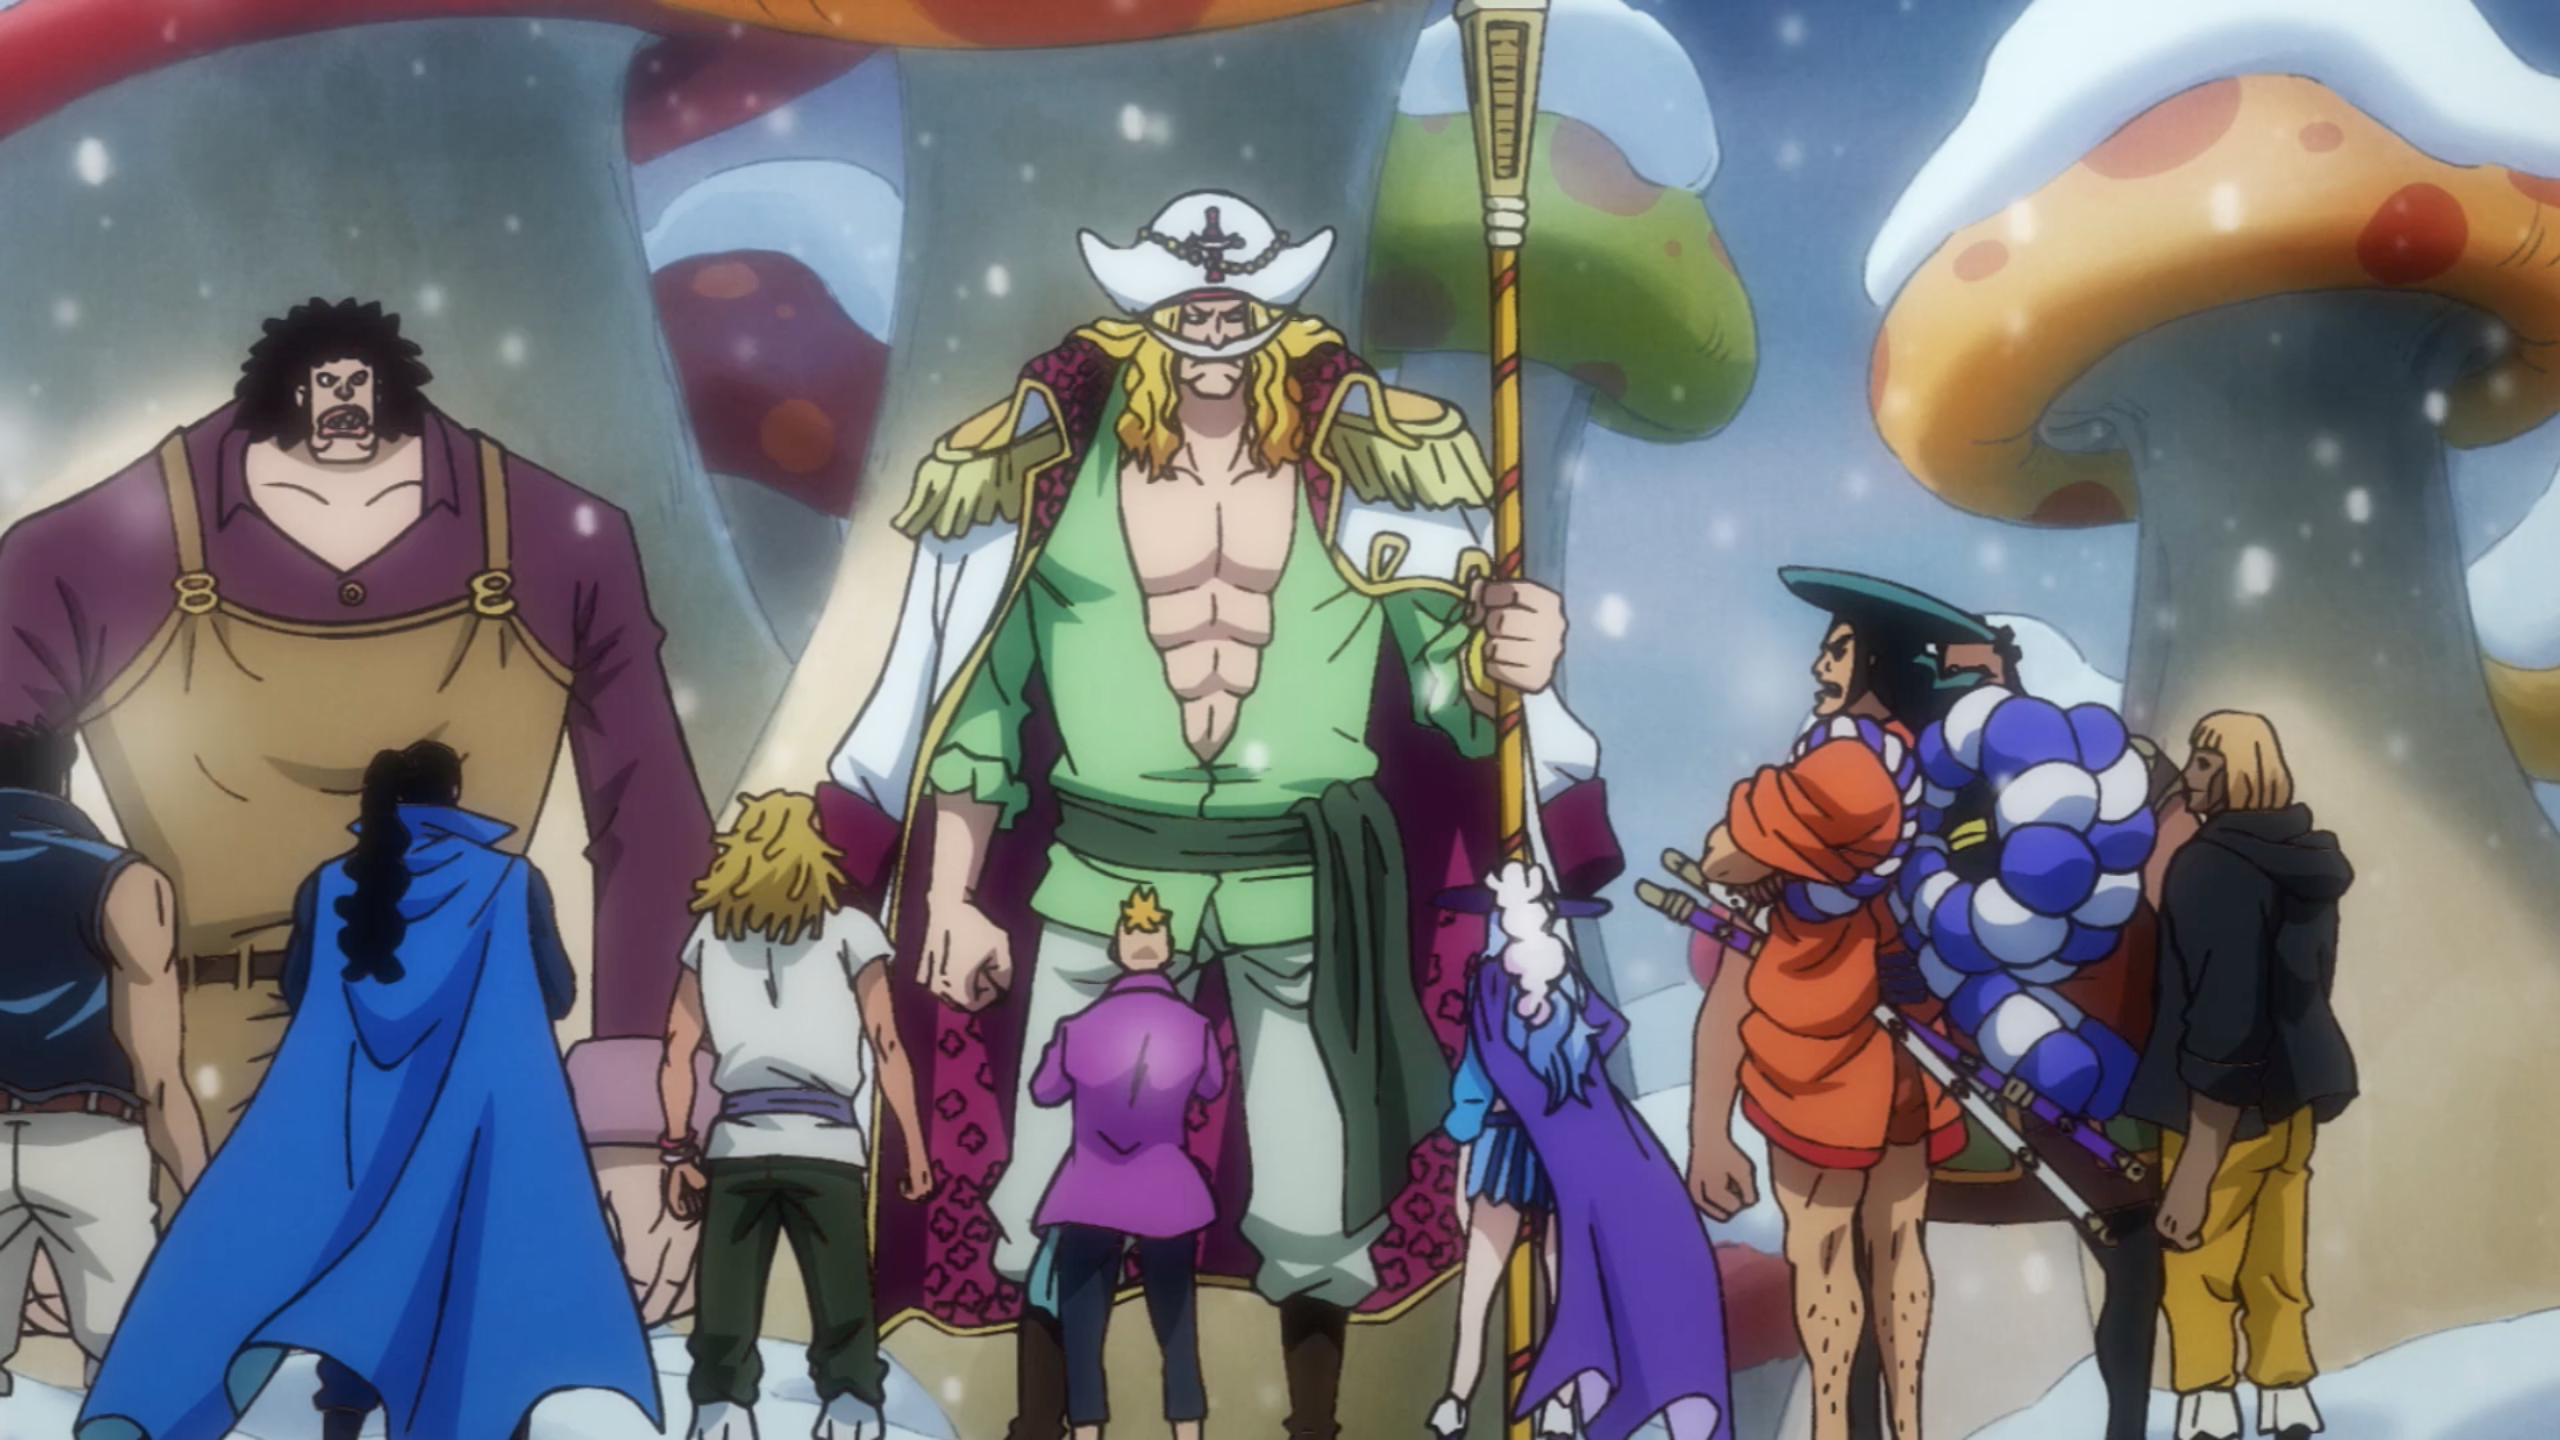 One Piece World - Our First Post About Grand Line <3 The Grand